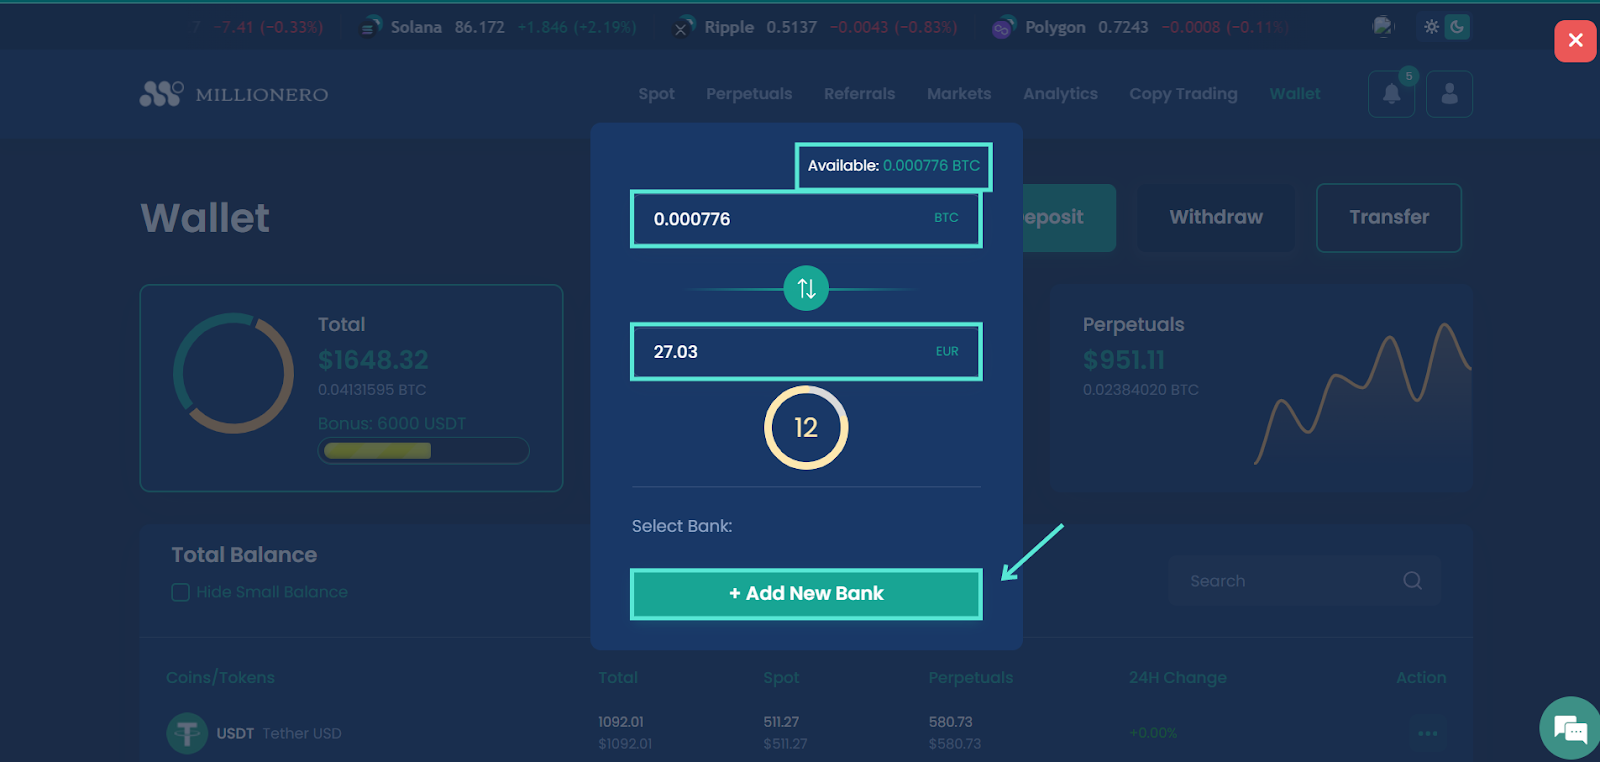 Withdraw your crypto as fiat after crypto trading on Millionero